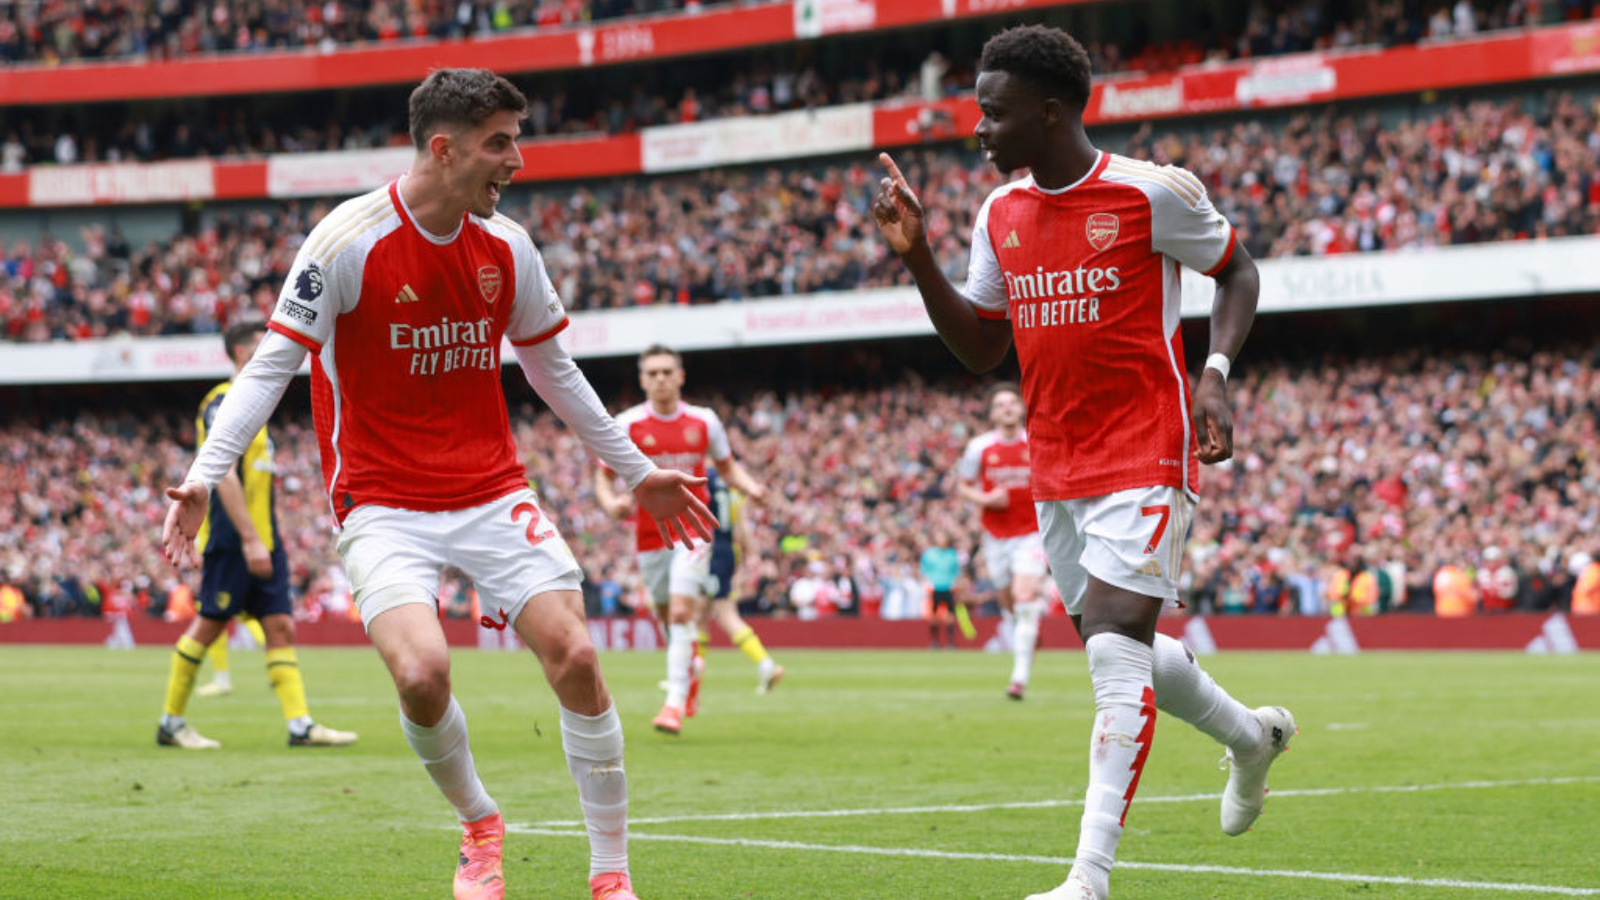 Arsenal players dey celebrate a goal for dia last match